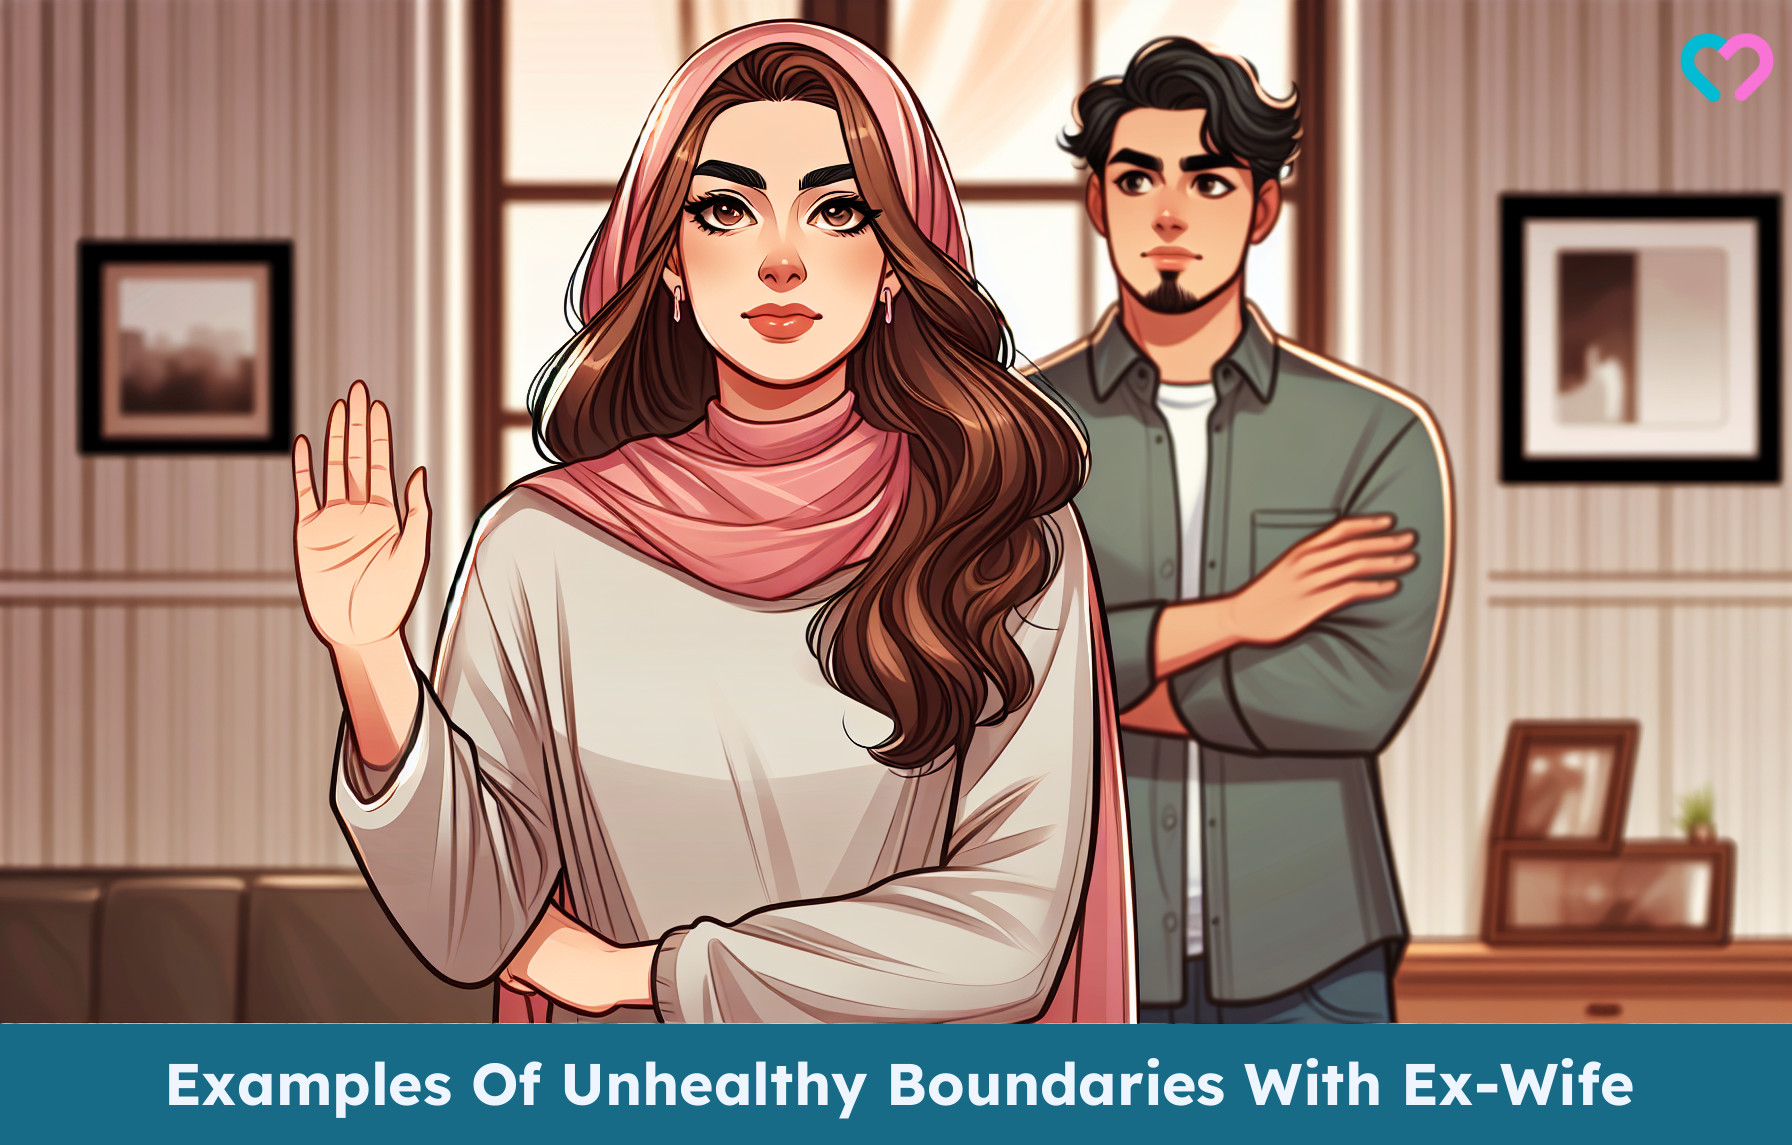 Boundaries With Ex-Wife_illustration